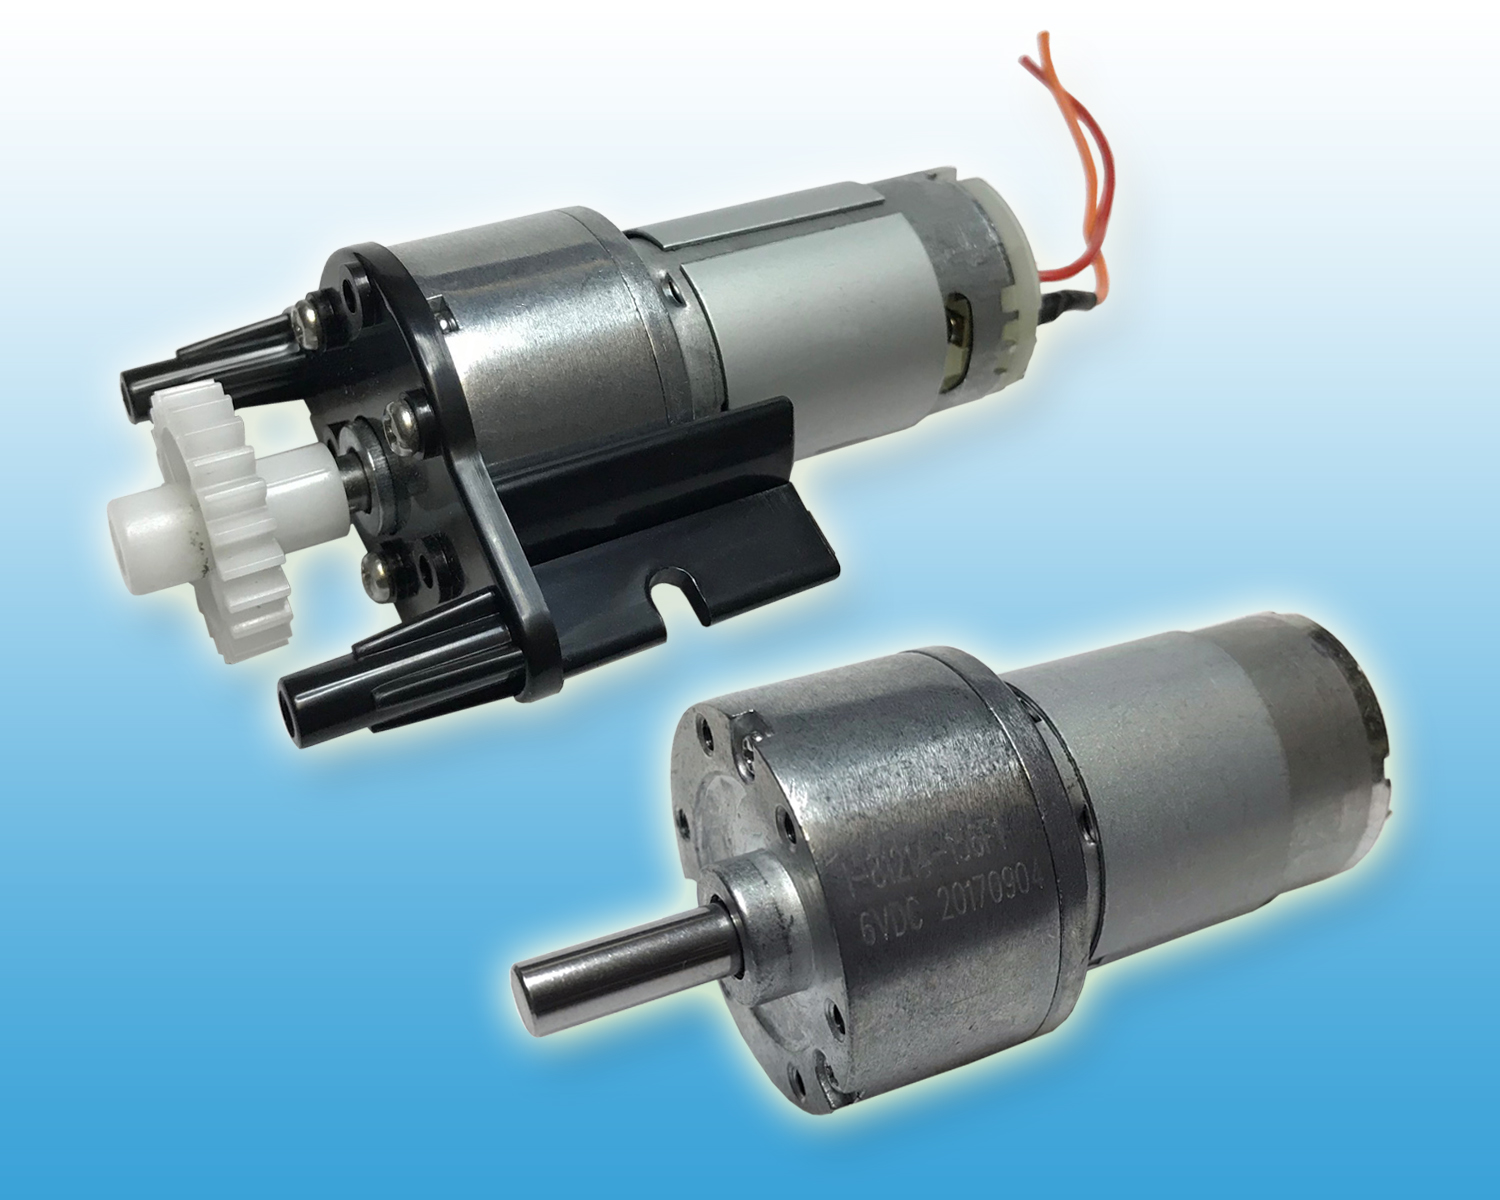 DC Motors Engineered For an Array of OEM Applications